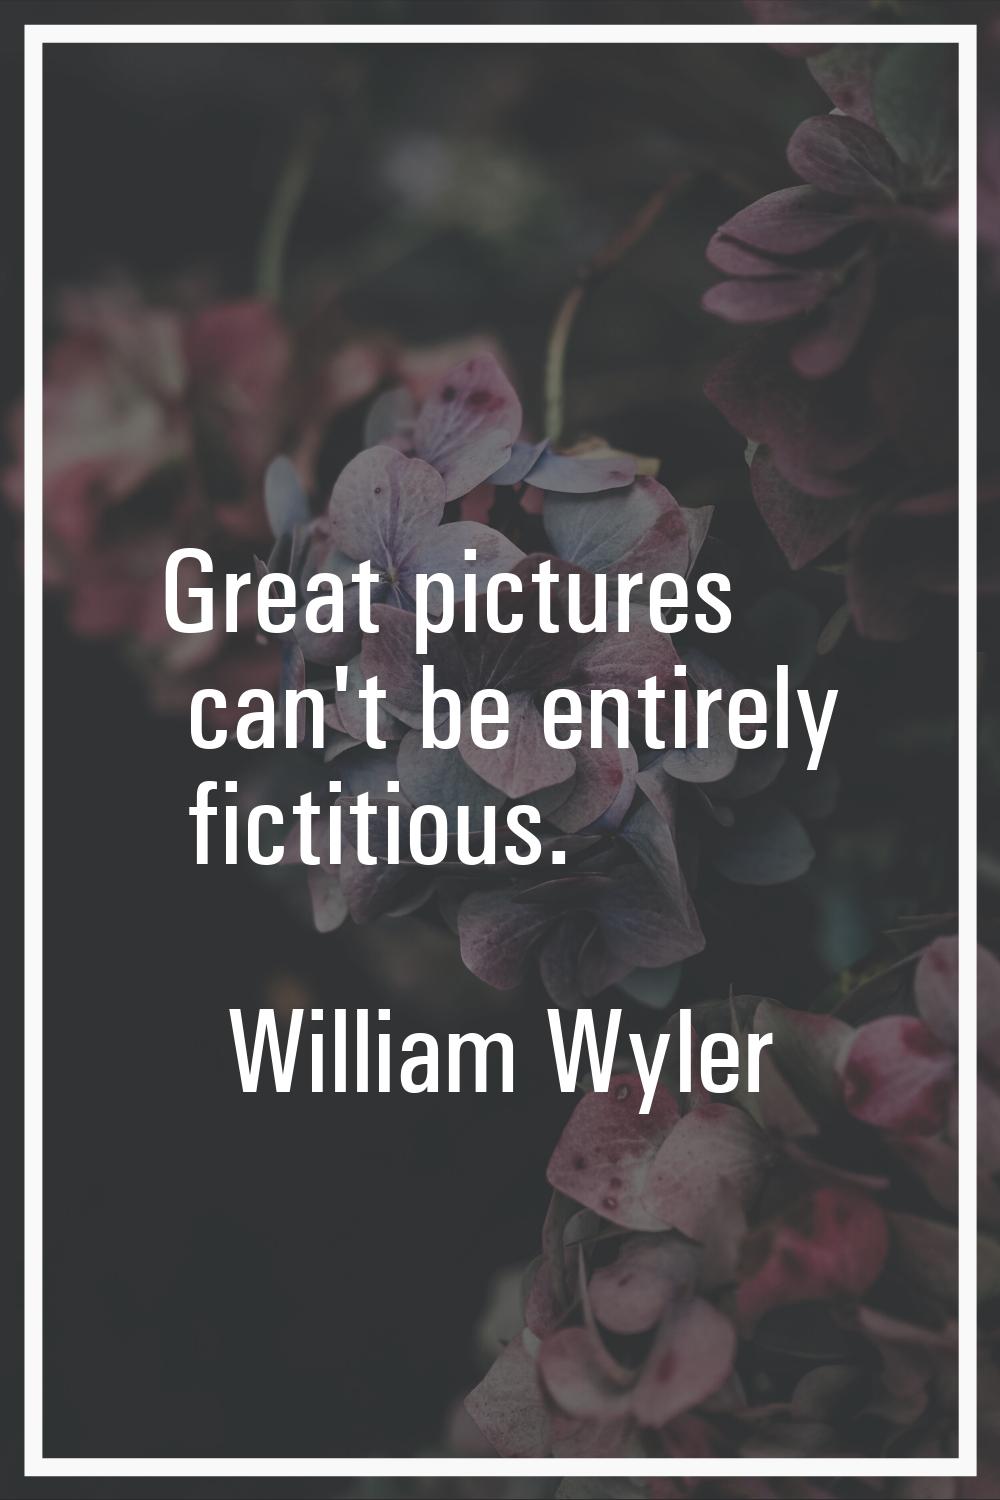 Great pictures can't be entirely fictitious.